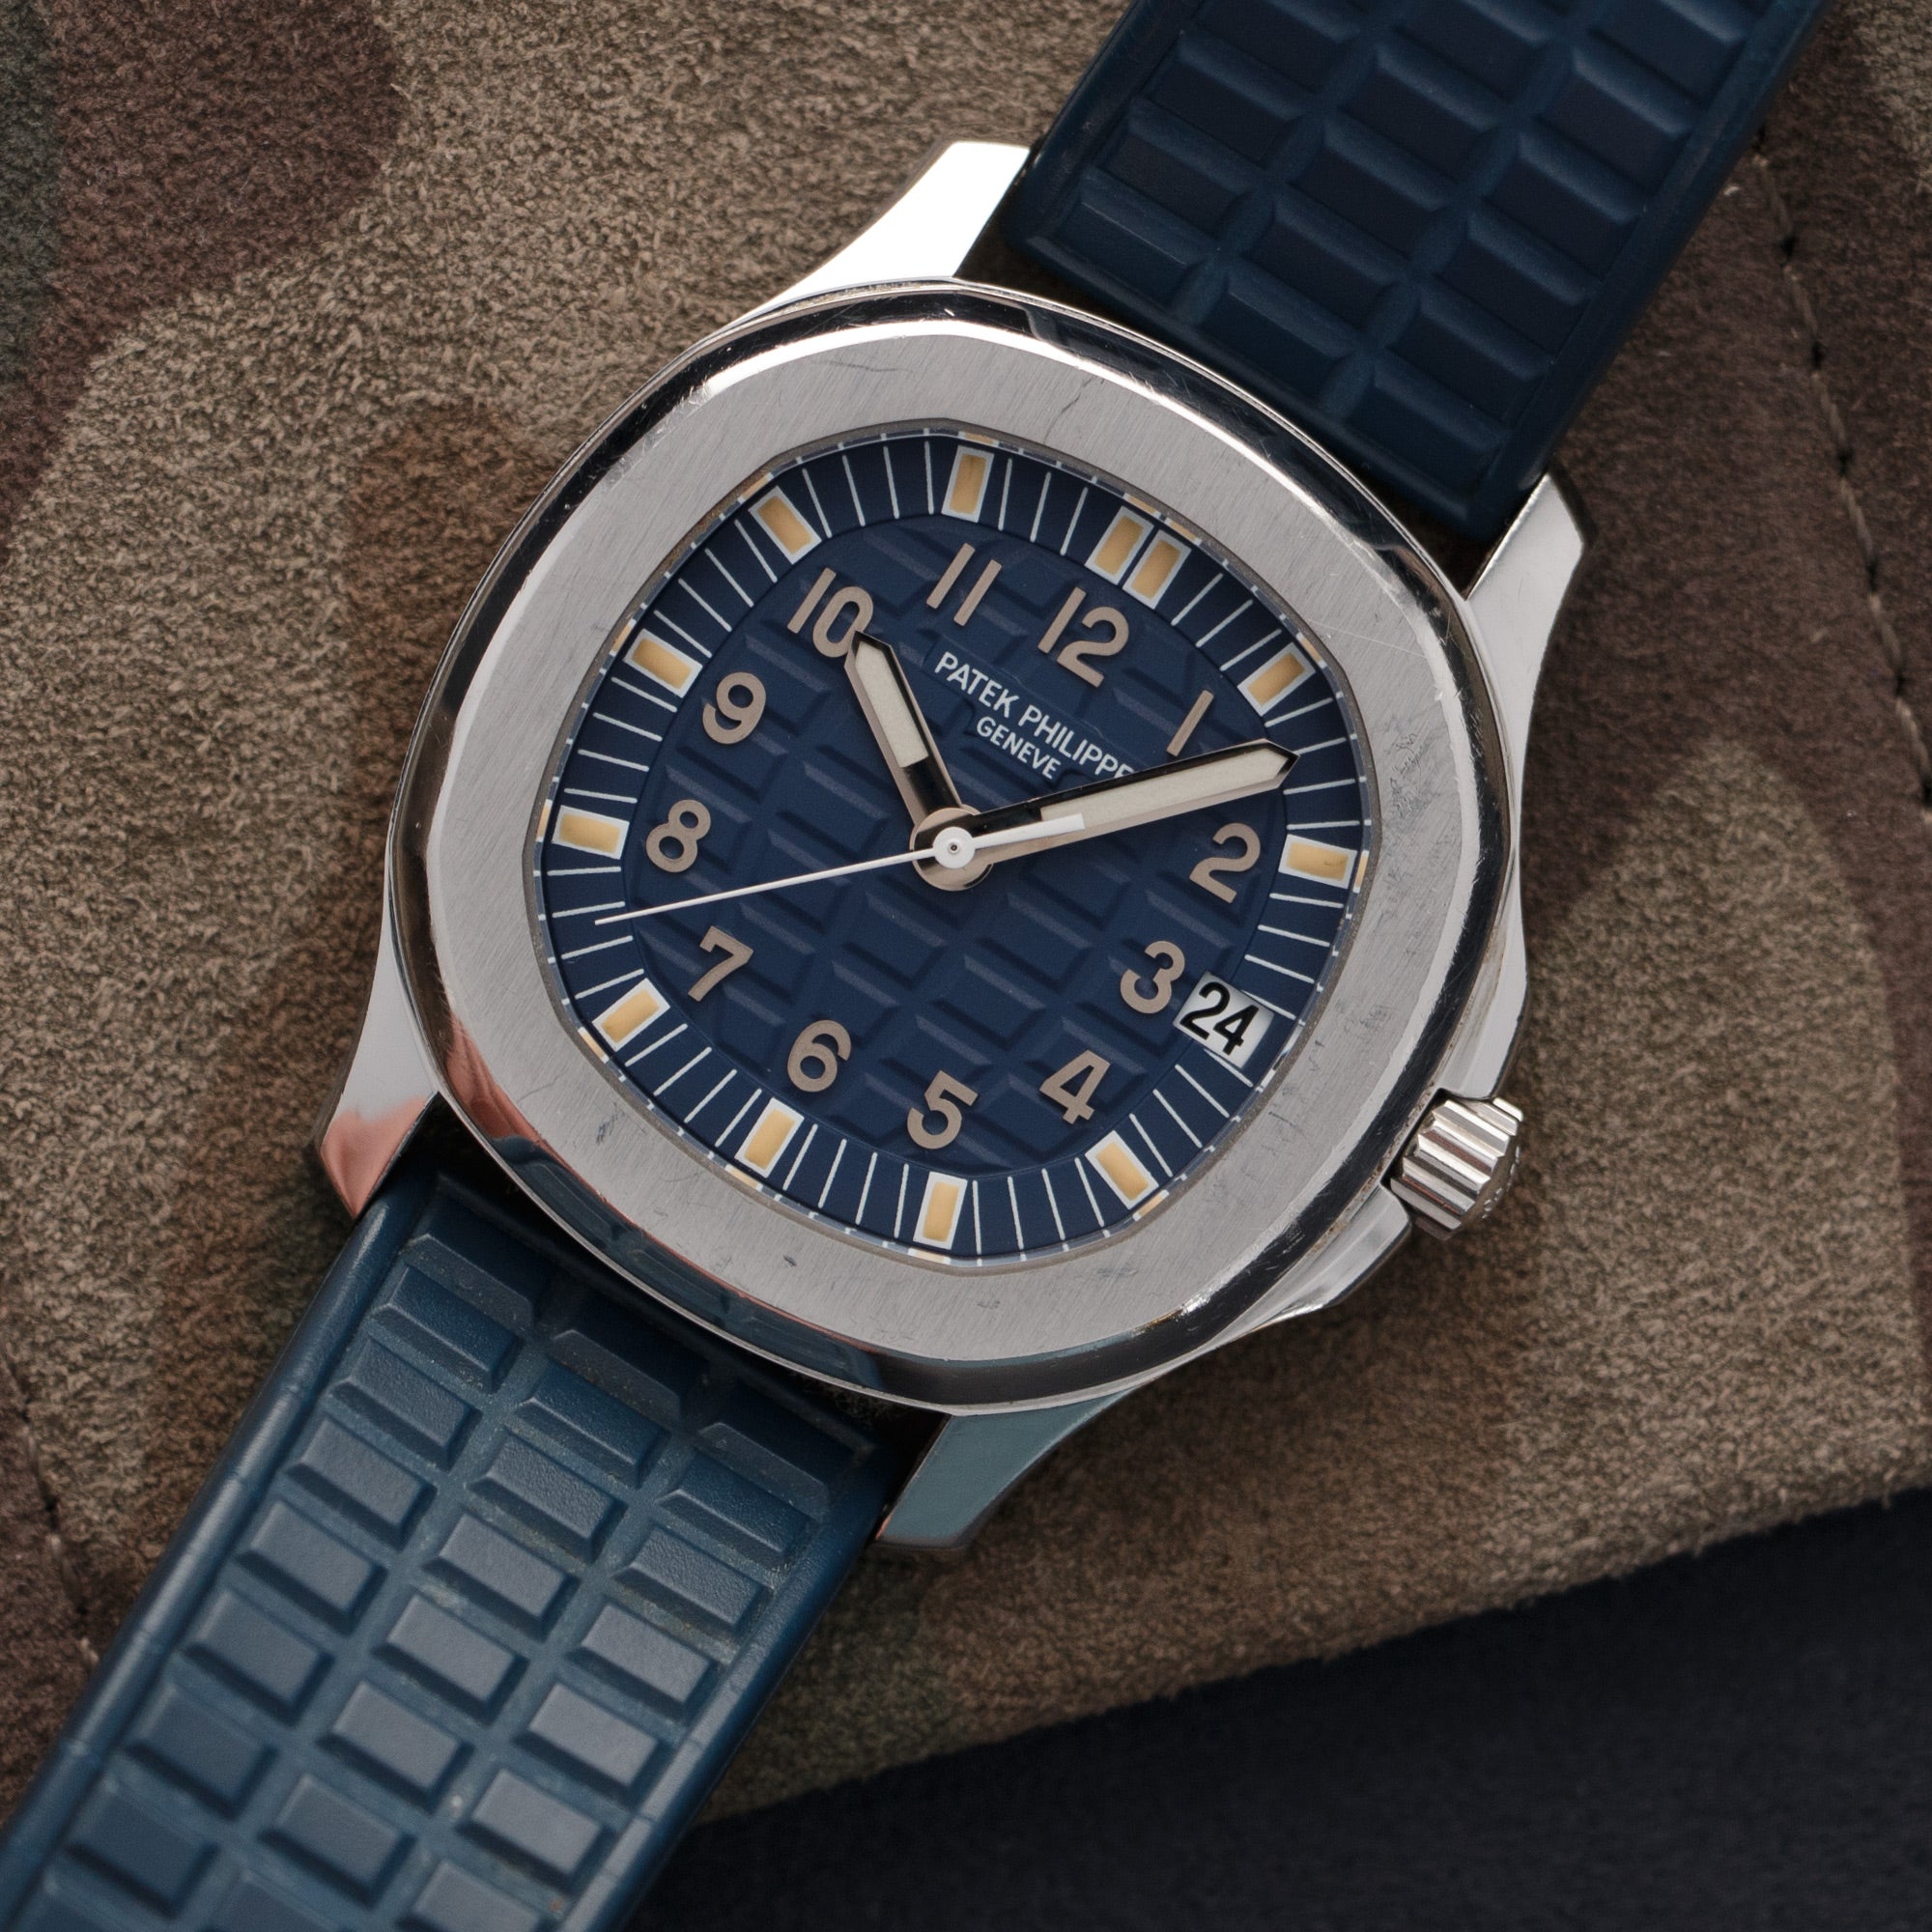 Patek Philippe - Patek Philippe Aquanaut Blue Dial Watch Ref. 5066, Made for the Japanese Market - The Keystone Watches